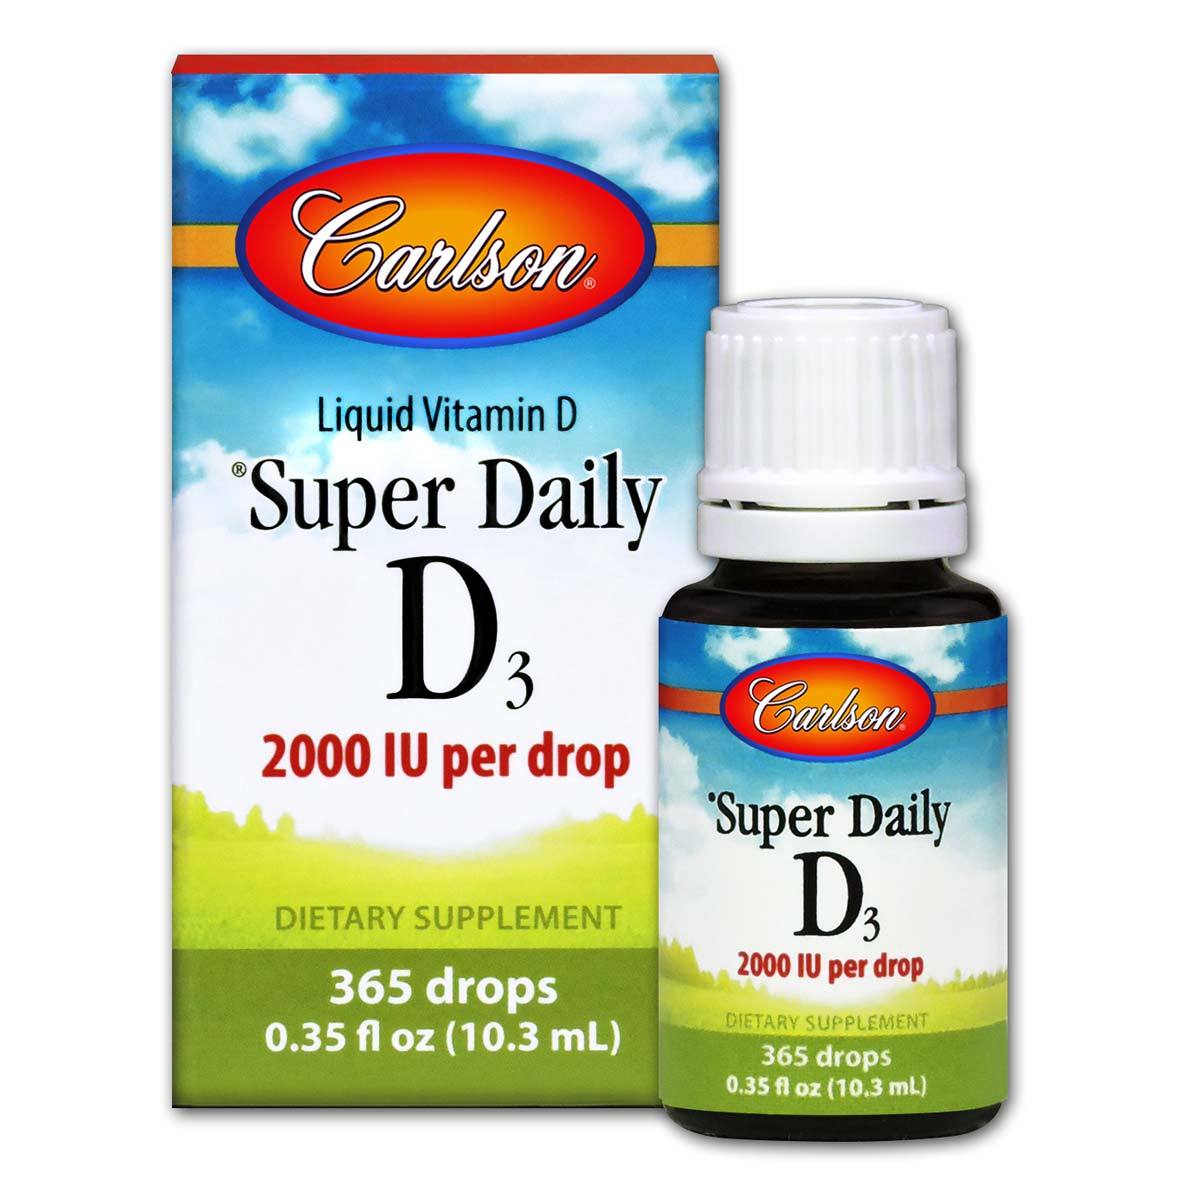 Primary image of Super Daily D3 (2,000 IU) Drops